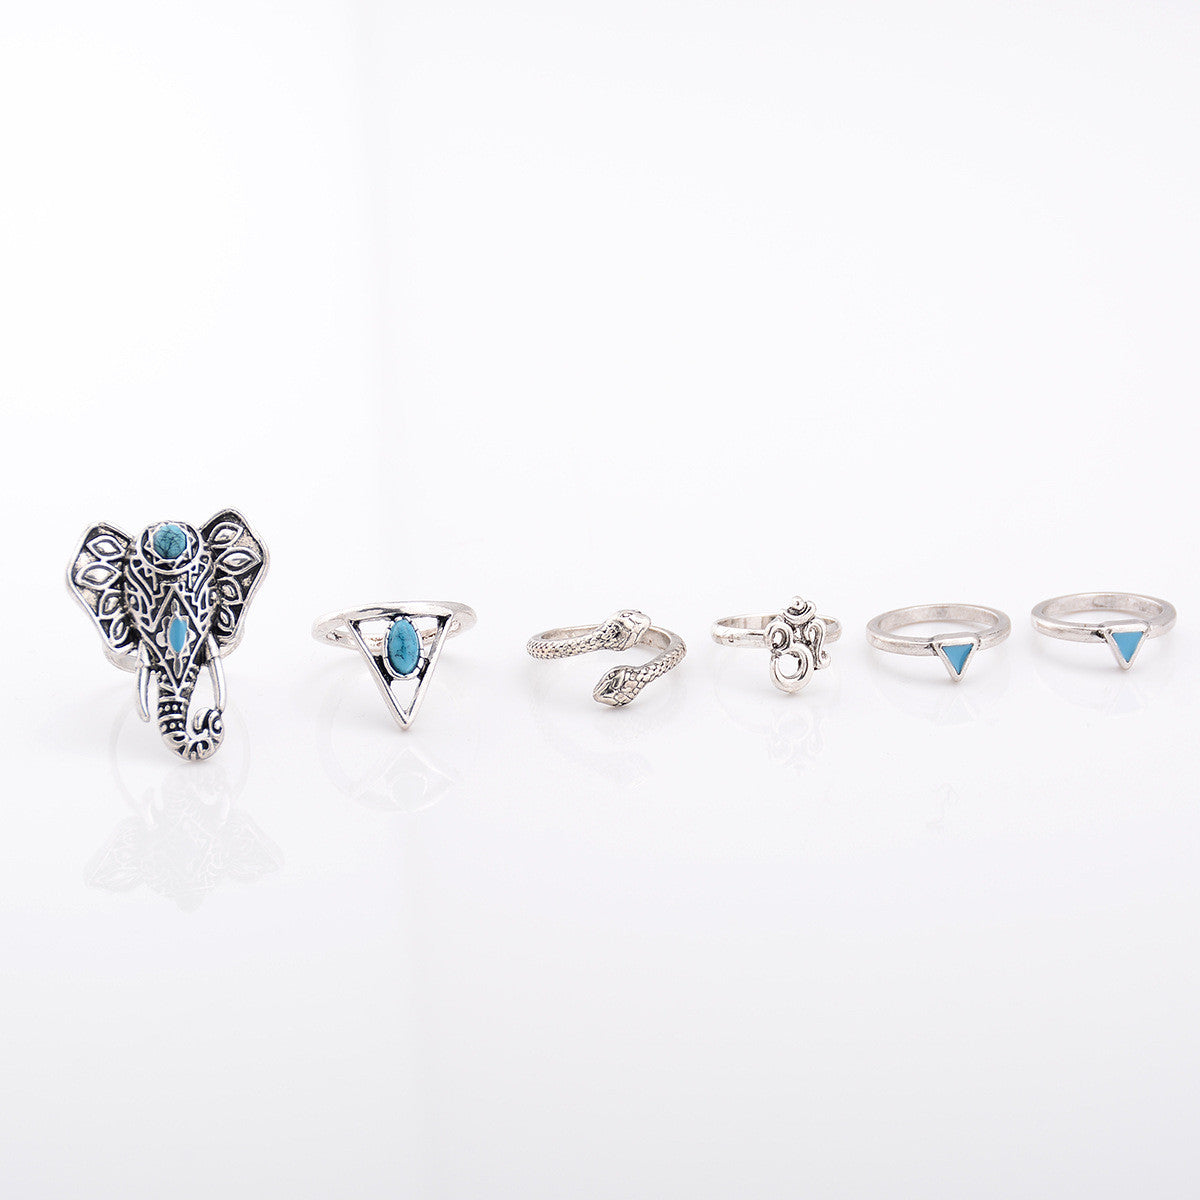 Exaggerate Elephant Snake Multi Combination Rings - Oh Yours Fashion - 4